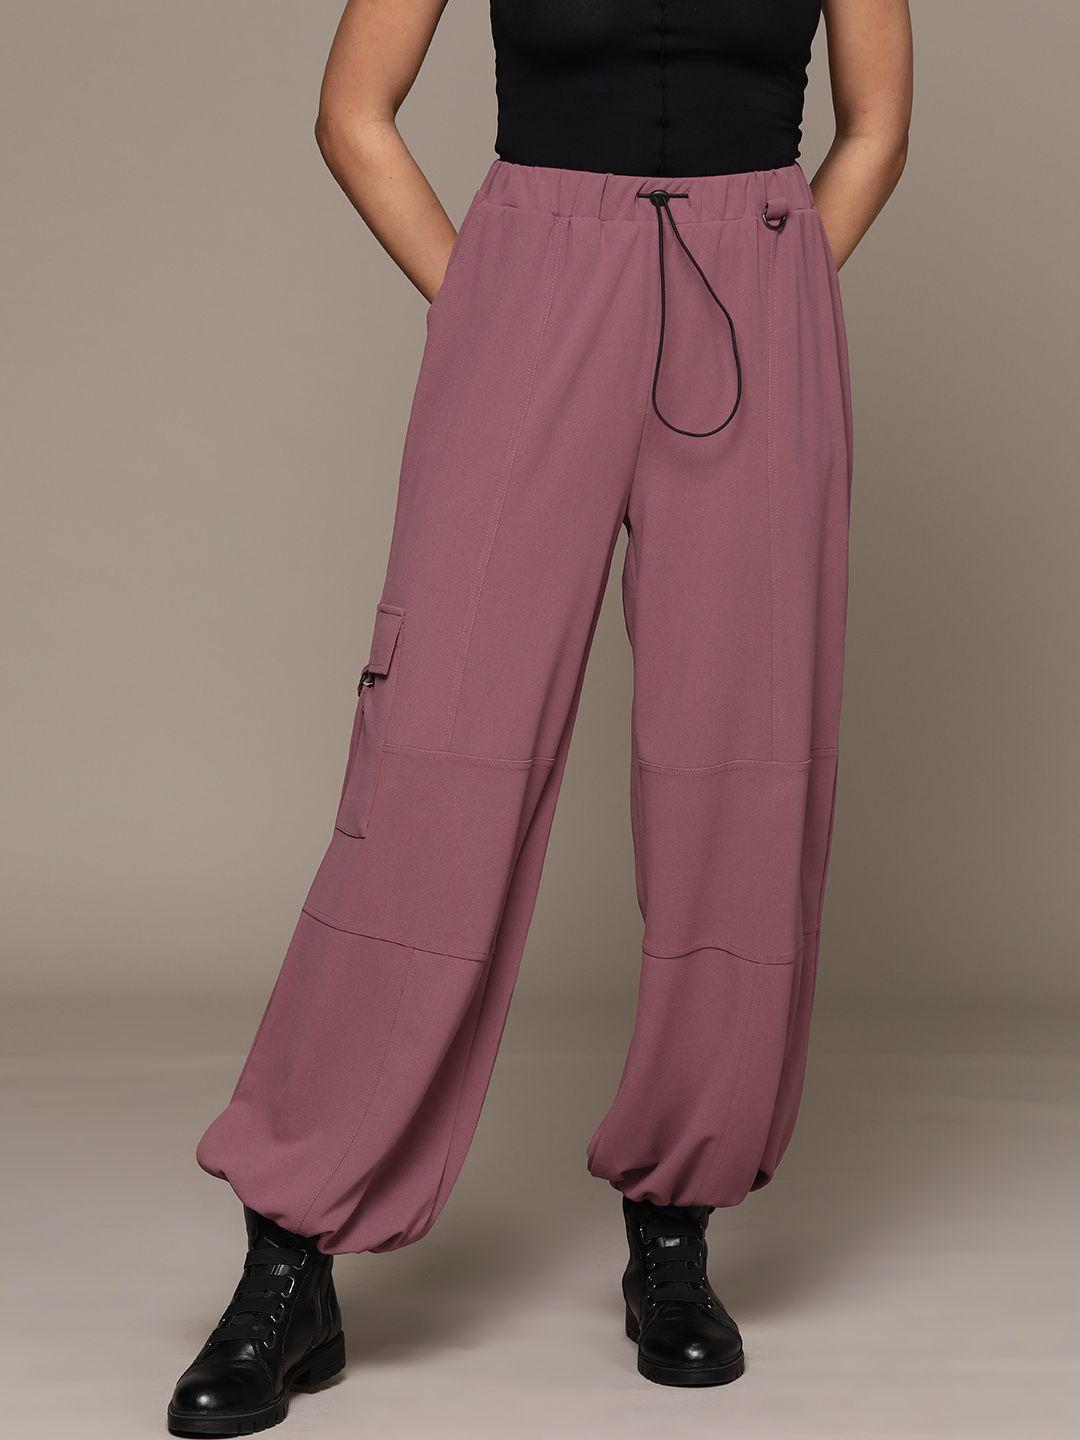 the roadster lifestyle co. women solid panelled joggers